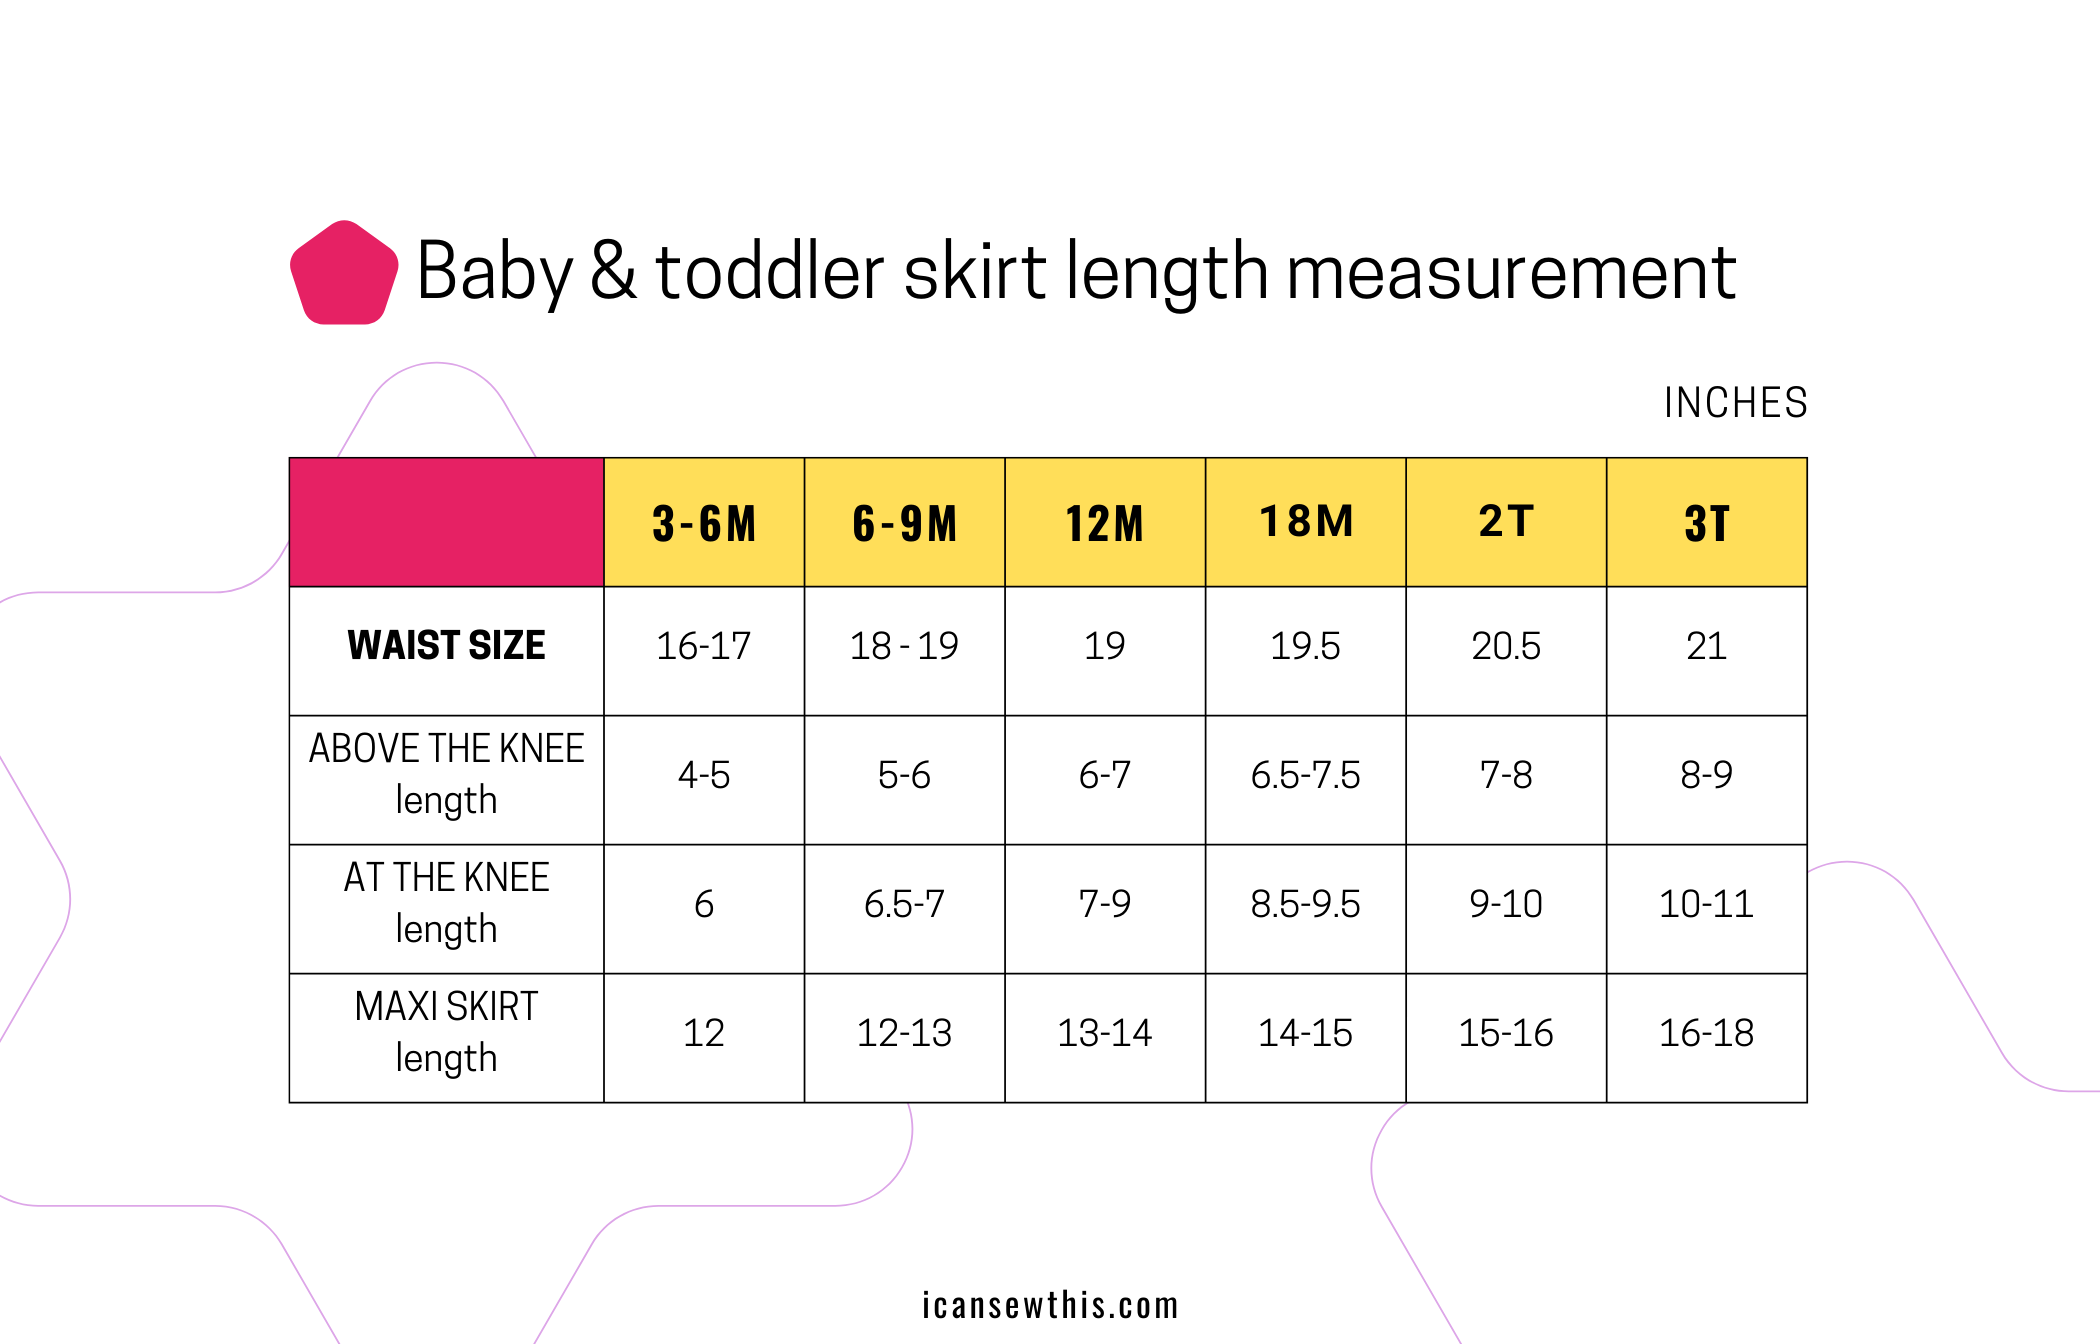 Girls skirt length measurements - a practical chart - I Can Sew This